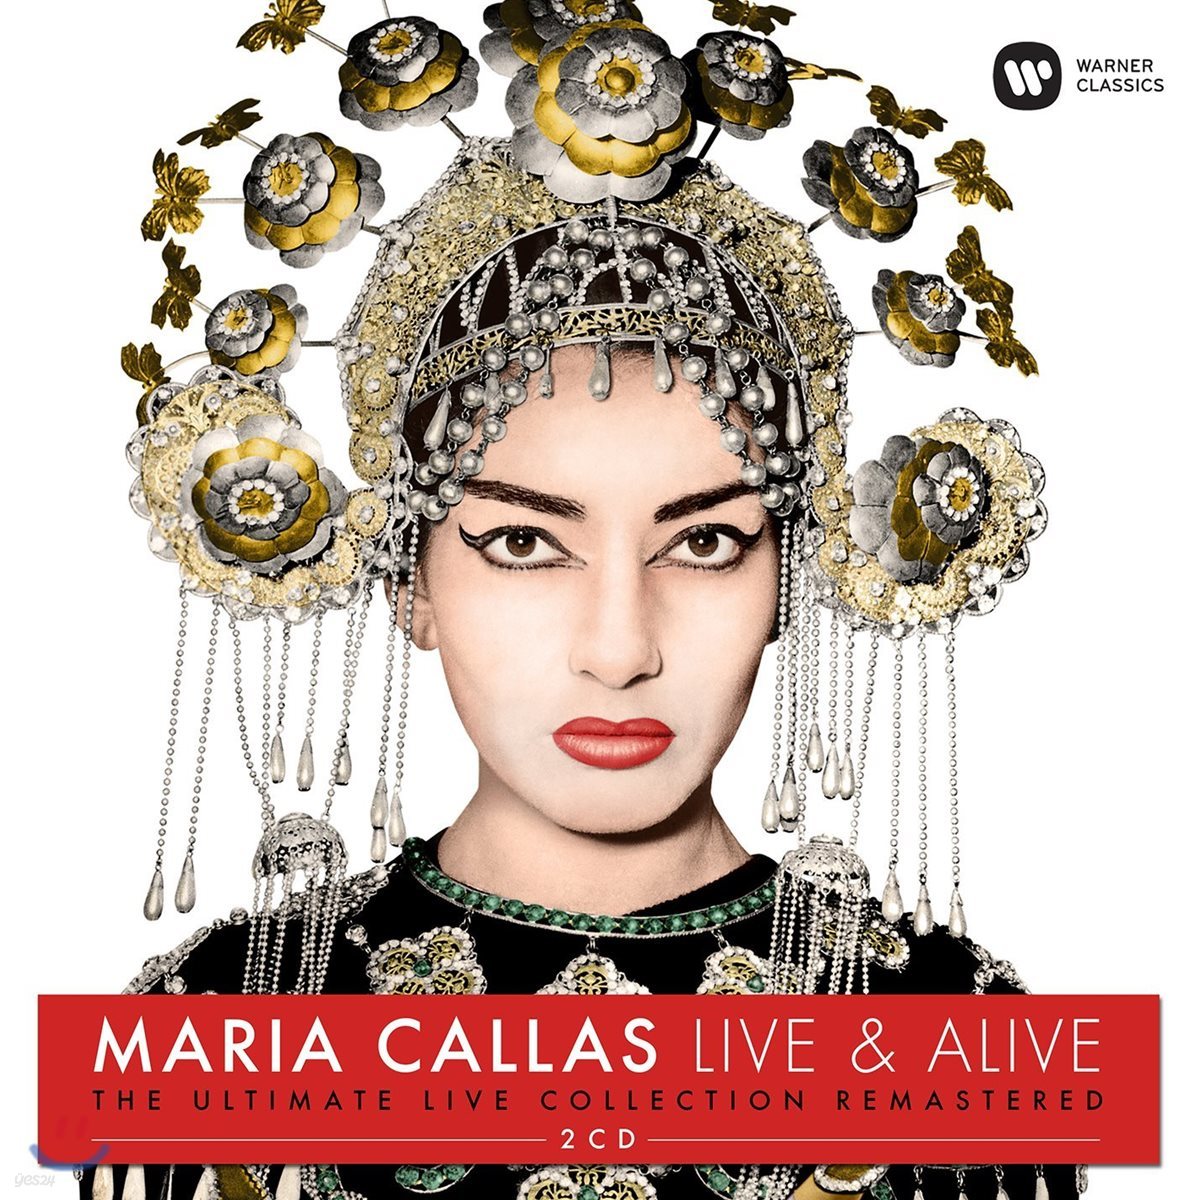 Maria Callas 마리아 칼라스 라이브 컬렉션 (Live &amp; Alive - The Ultimate Live Collection Remastered)